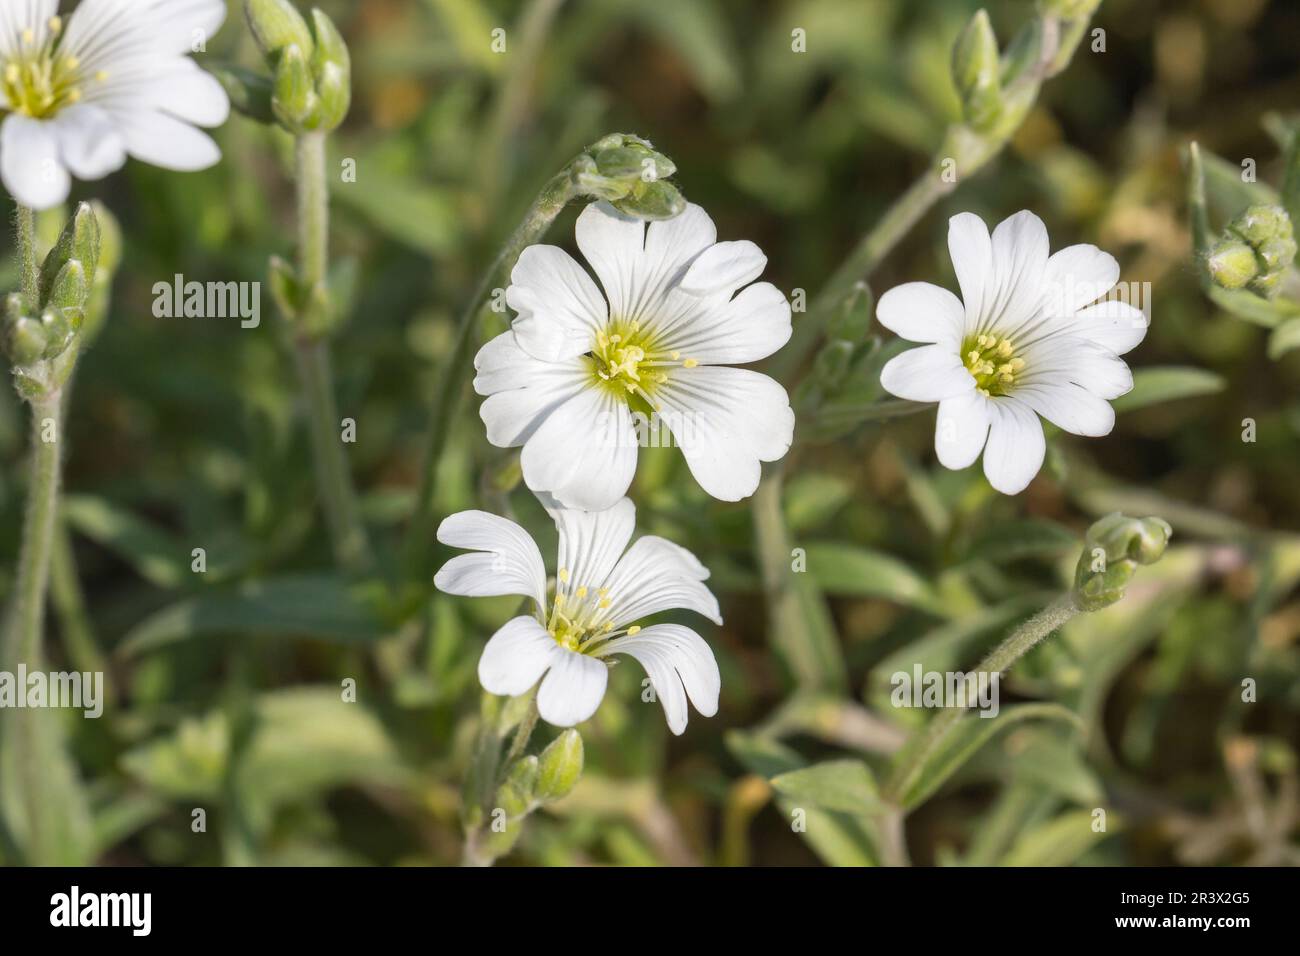 Cerastium arvense, ssp. arvense, known as Field chickweed, Field mouse-ear Stock Photo